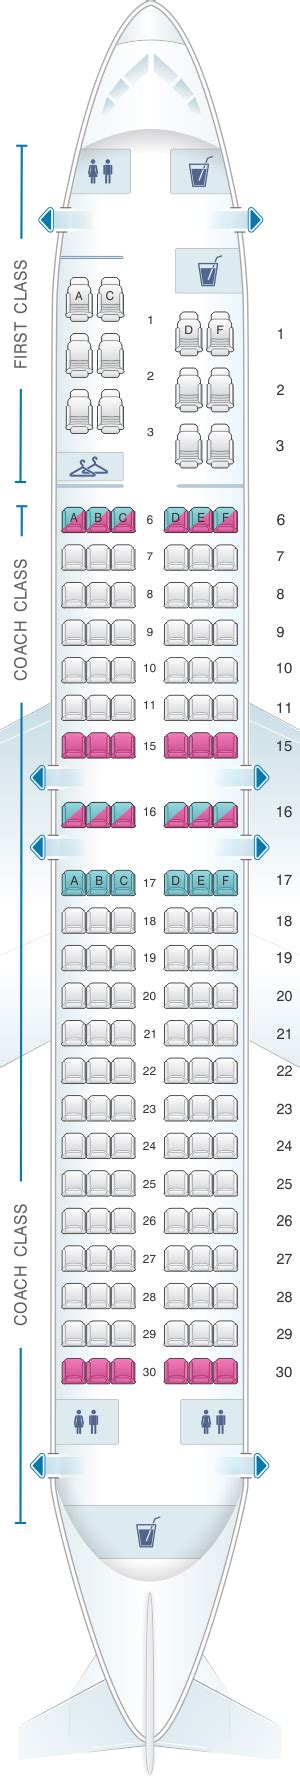 Boeing Seating Chart Alaska Airlines Infoupdate Org